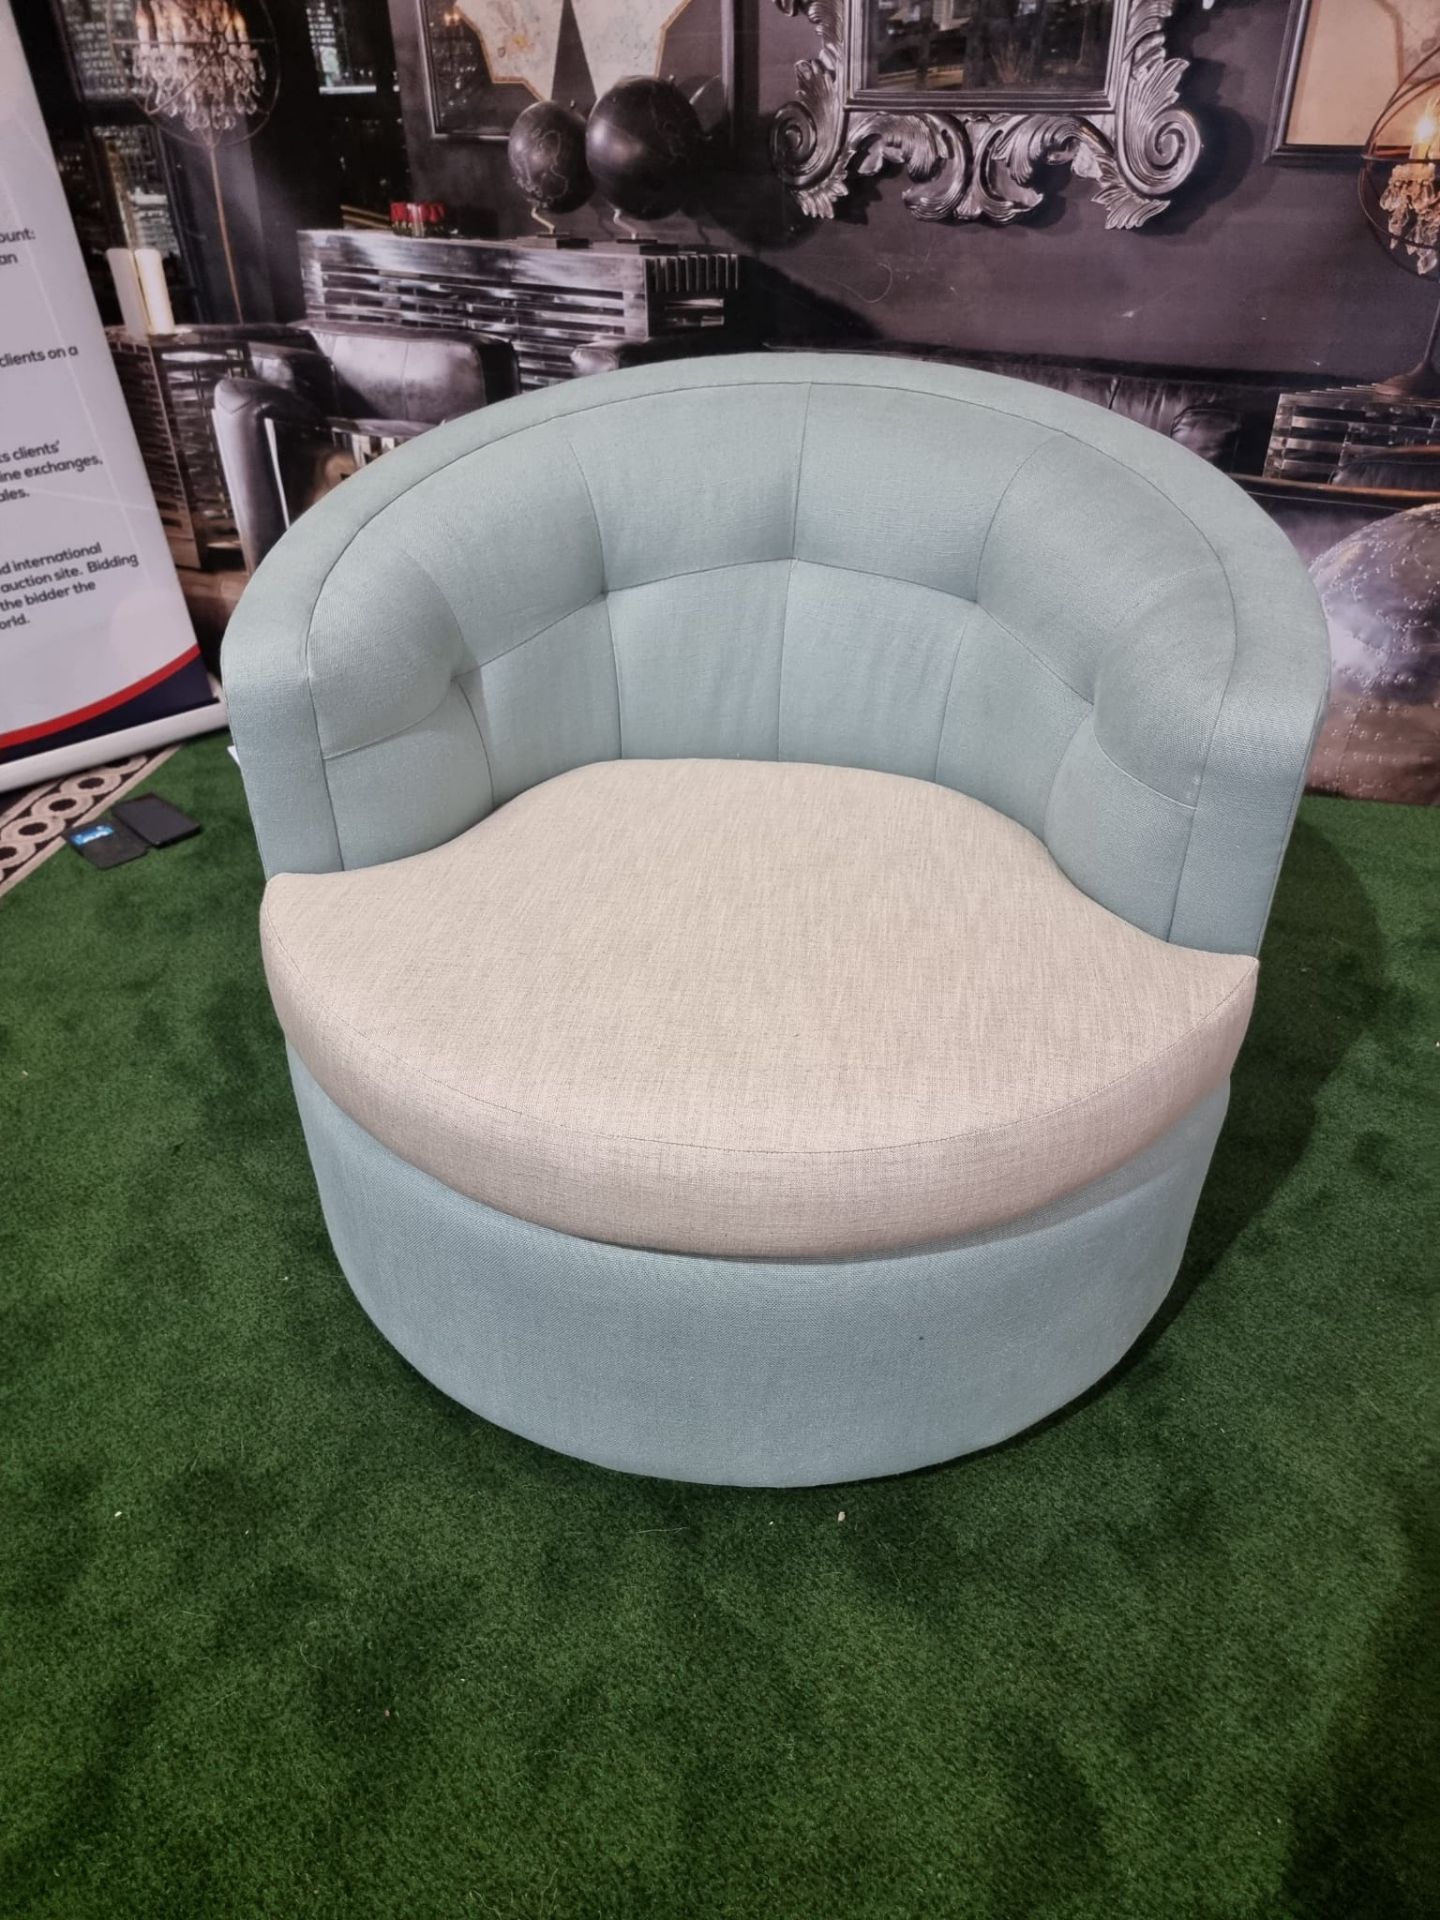 Mayfair Swivel Armchair This Swivel Armchair Makes A Real Statement And Adds A Contemporary Accent - Bild 5 aus 7